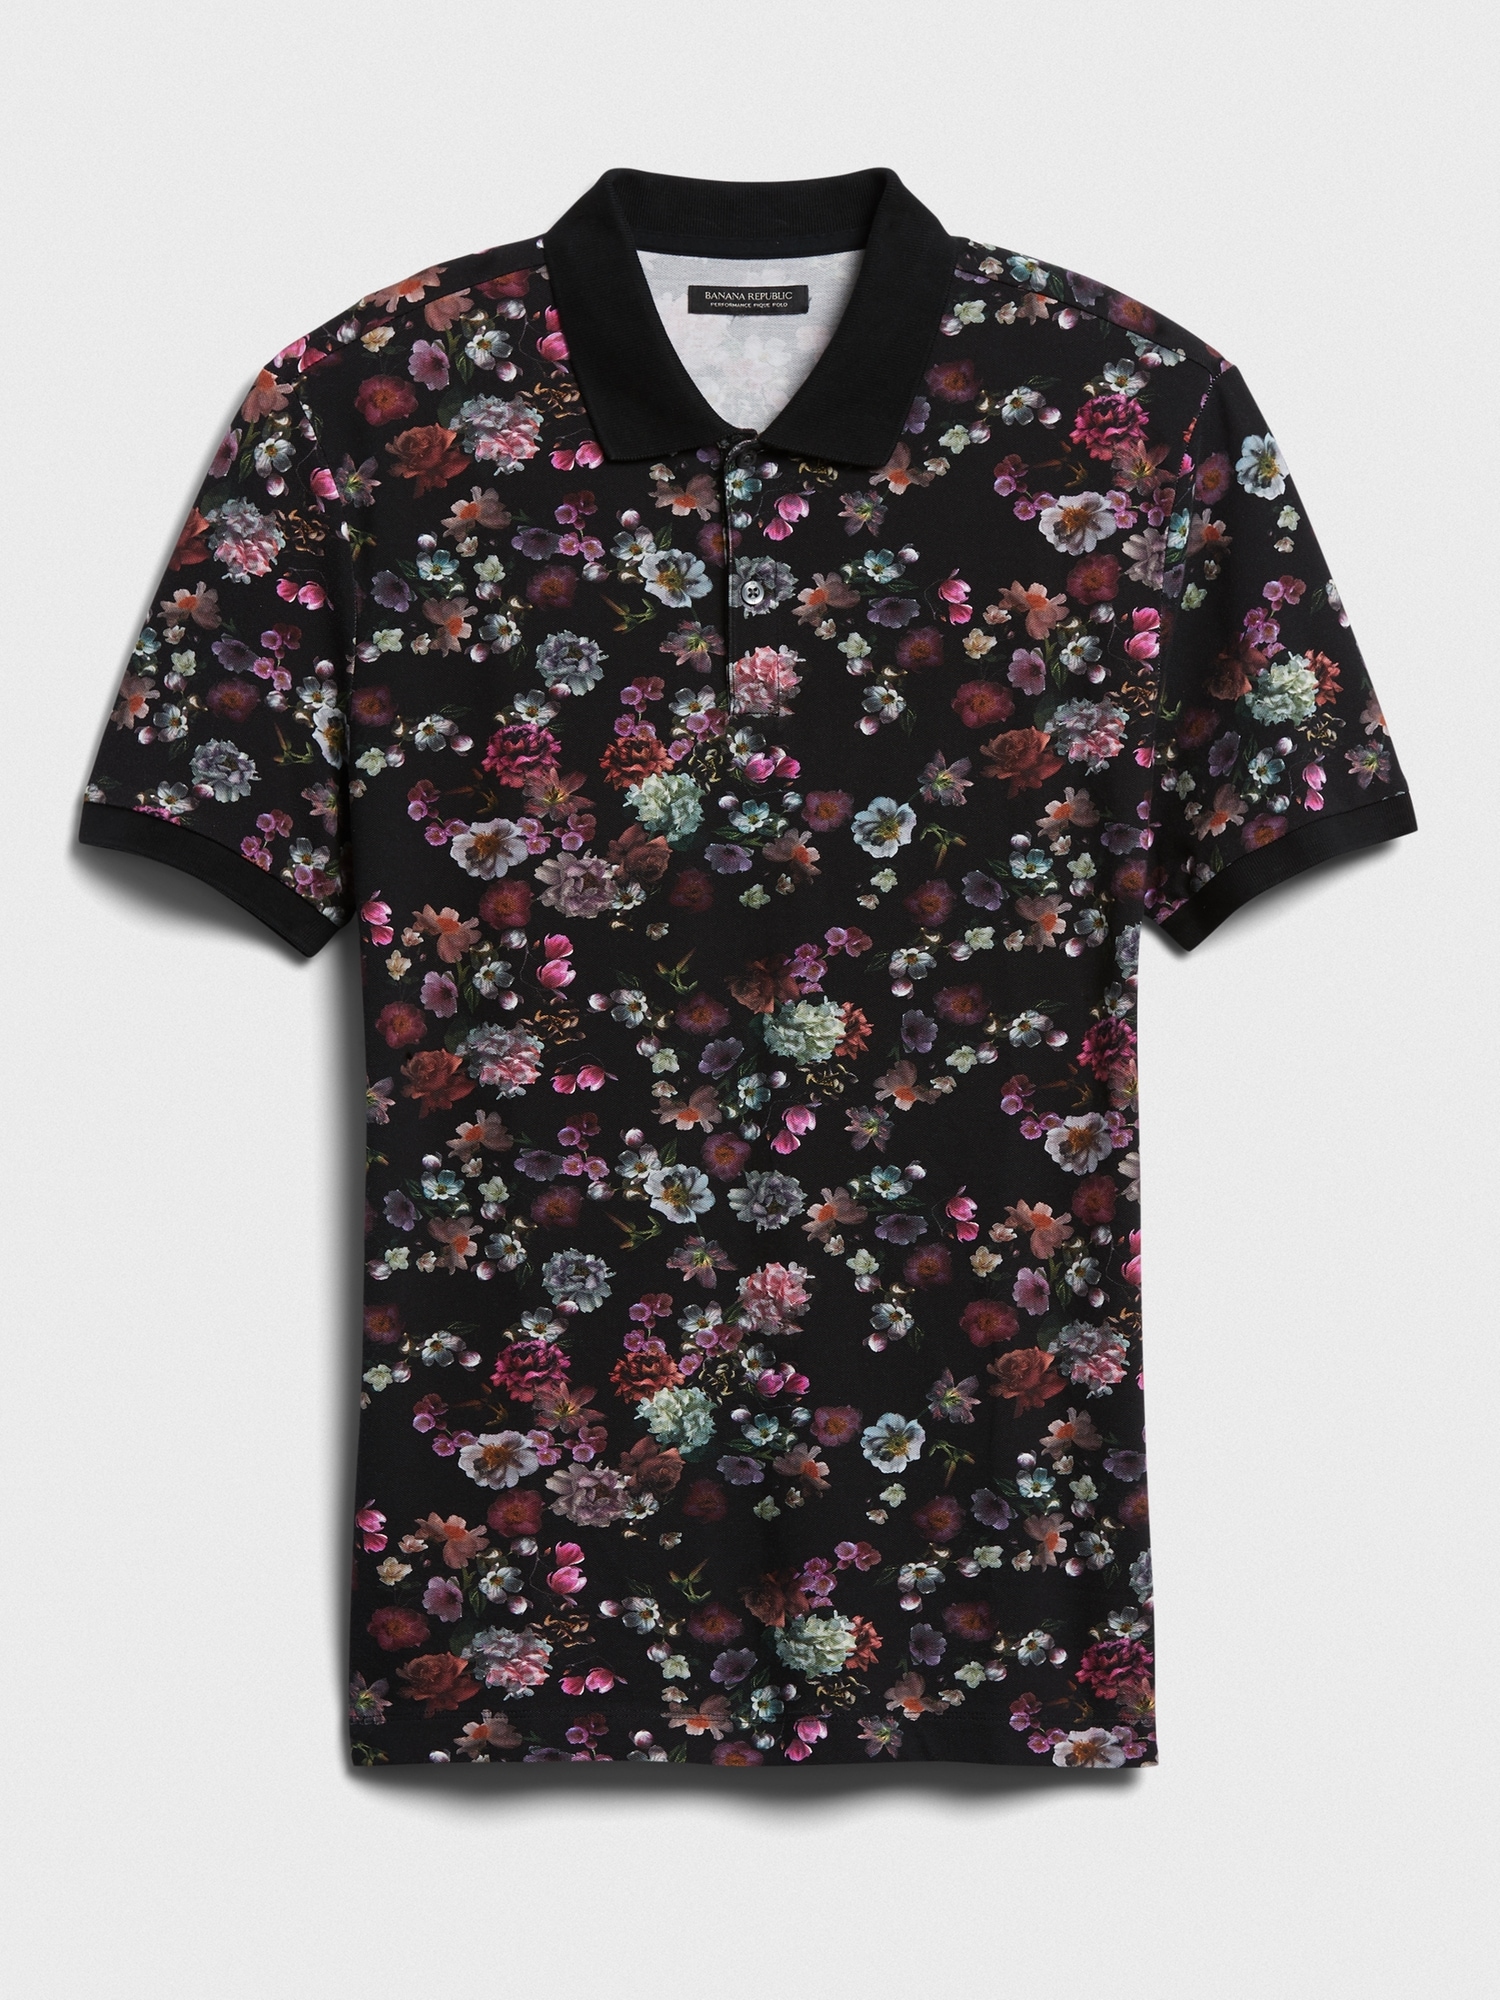 Don't-Sweat-It Floral Polo